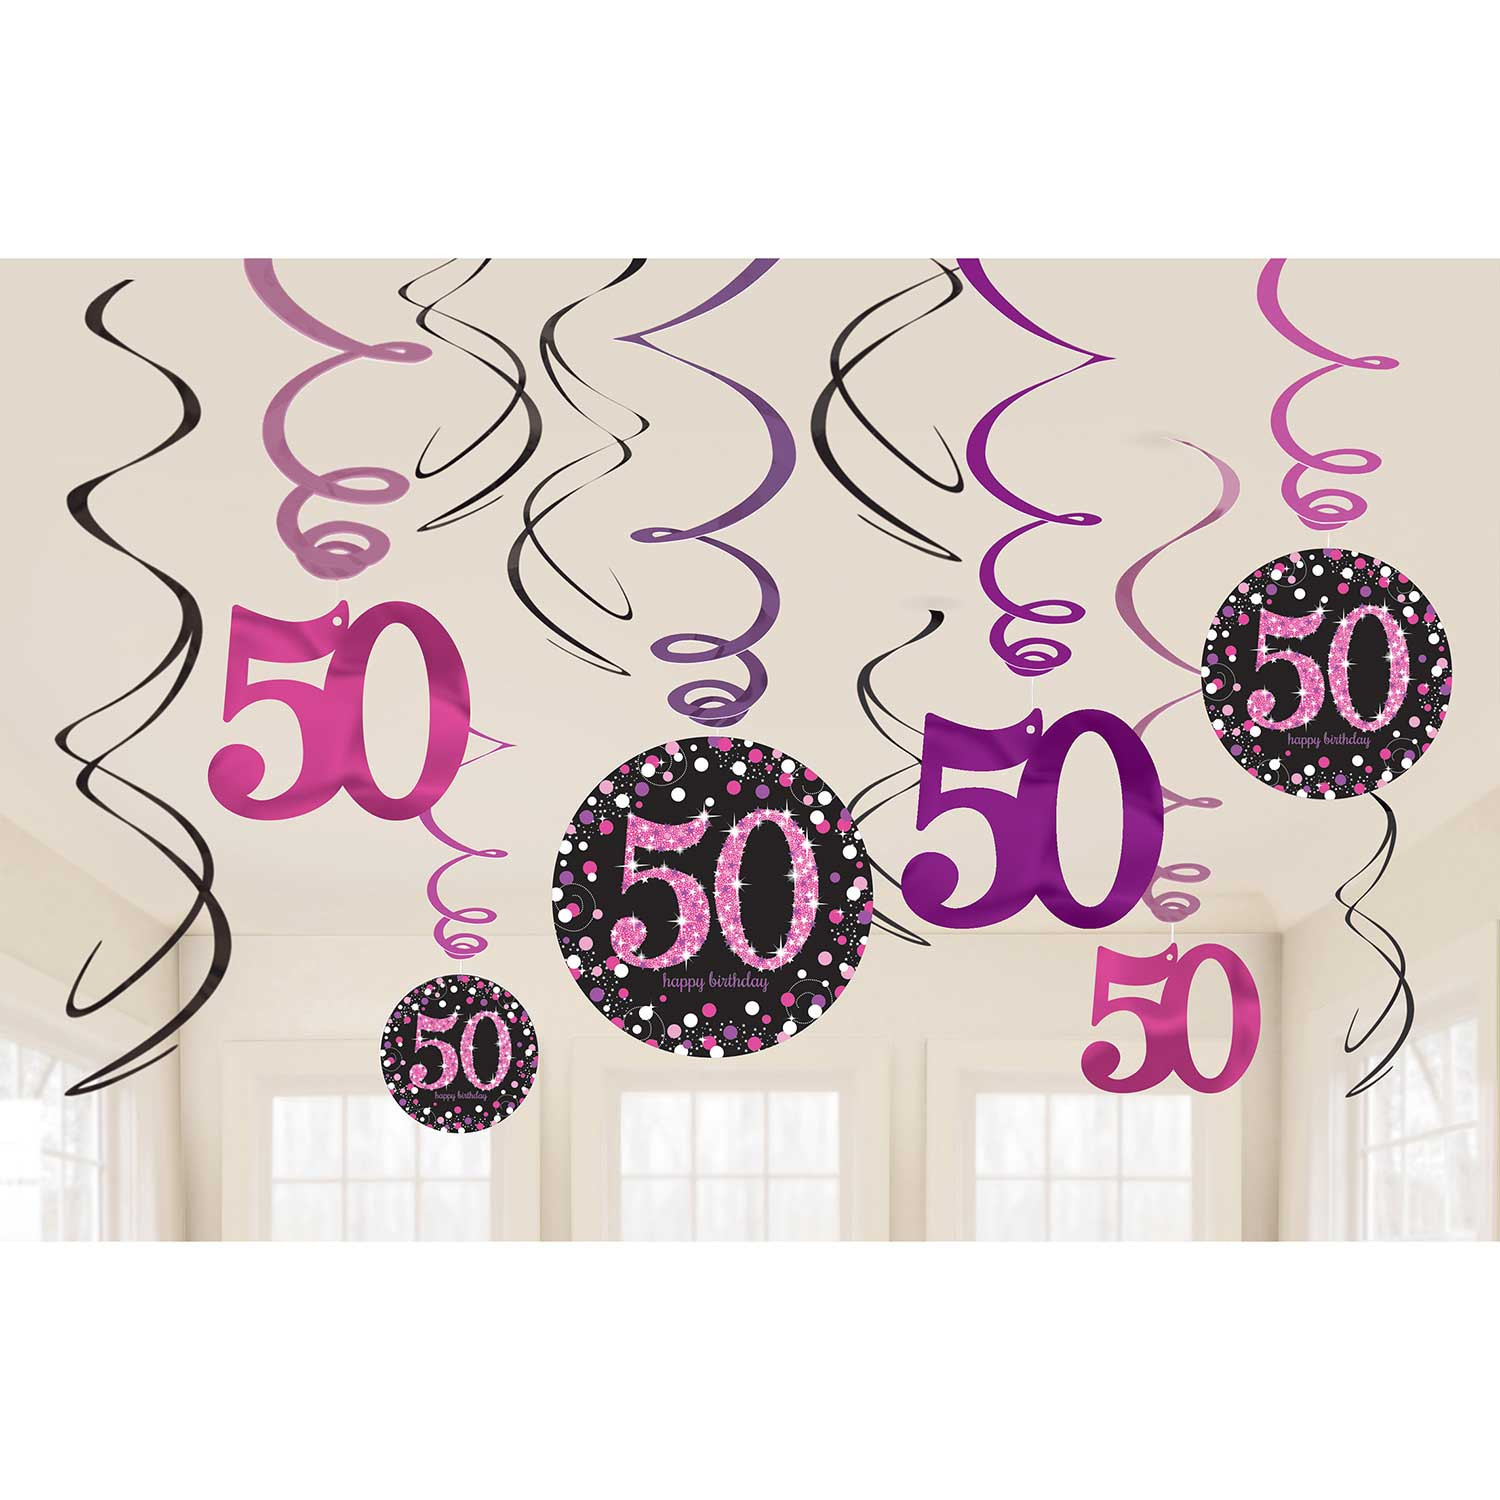 Amscan Pink Sparkling Celebration 50th Hanging Swirl Decorations RRP £5.54 CLEARANCE XL £2.99